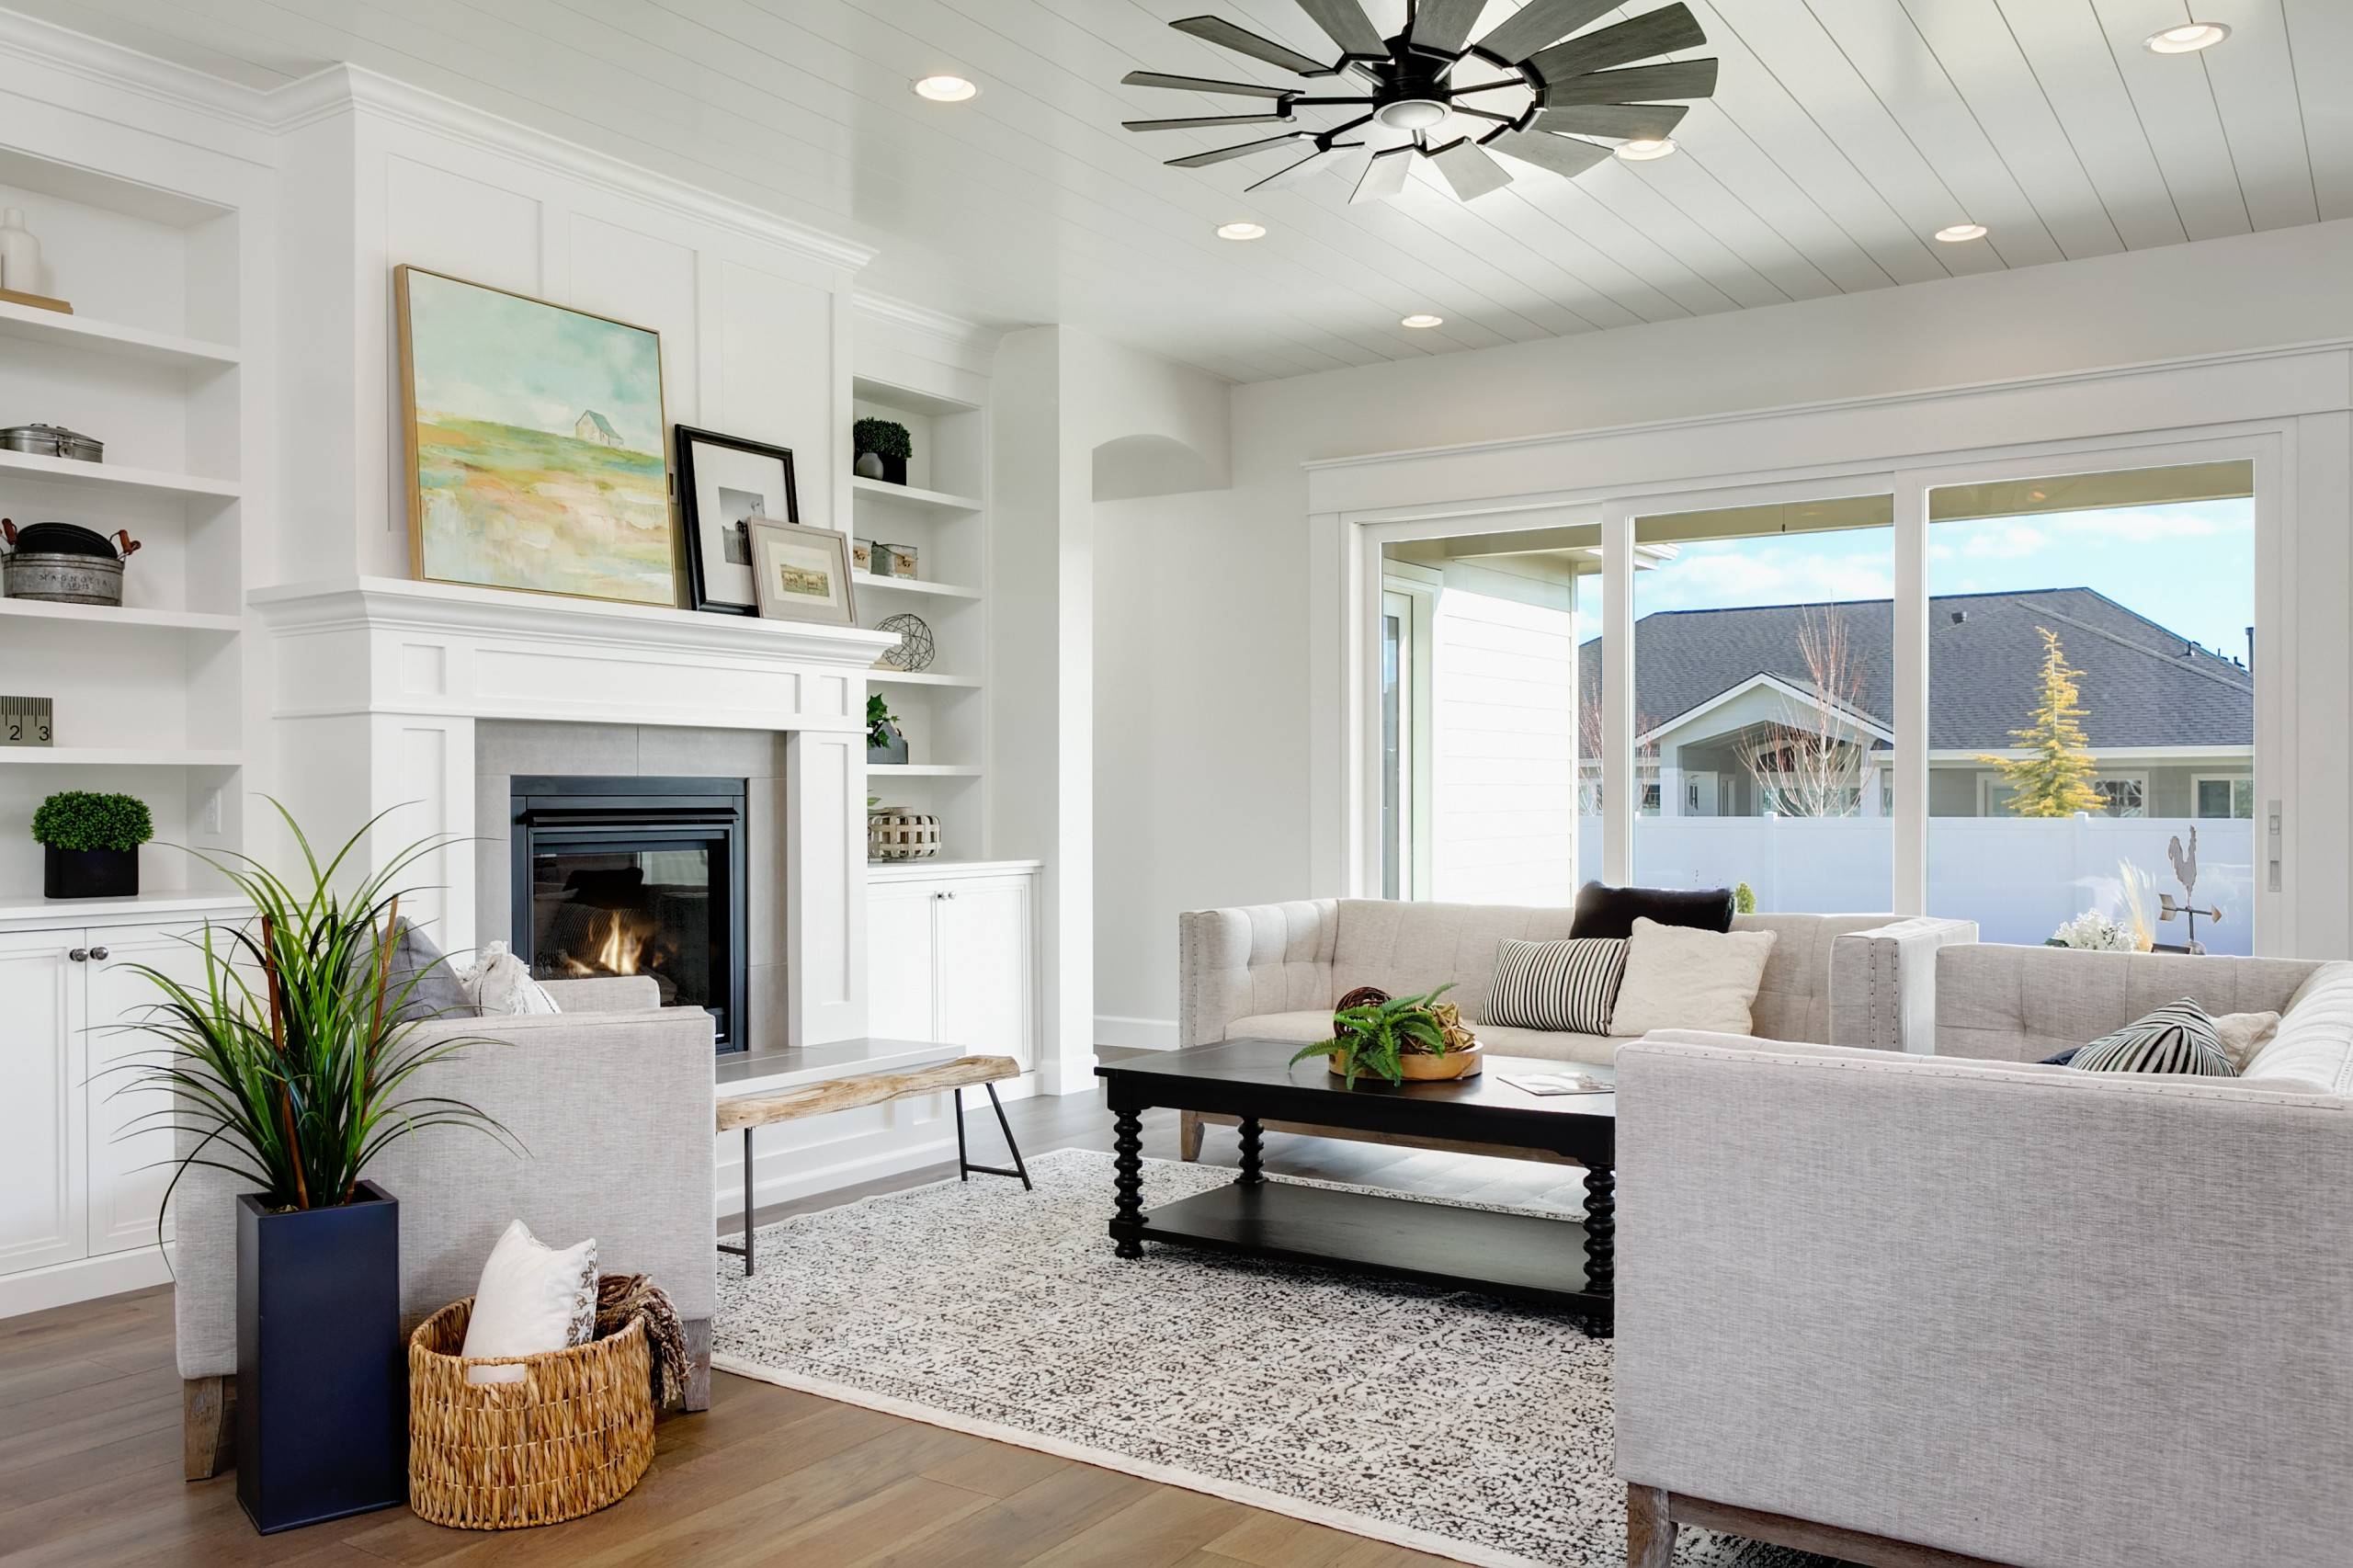 Neutral color appeal to everyone (from Houzz)